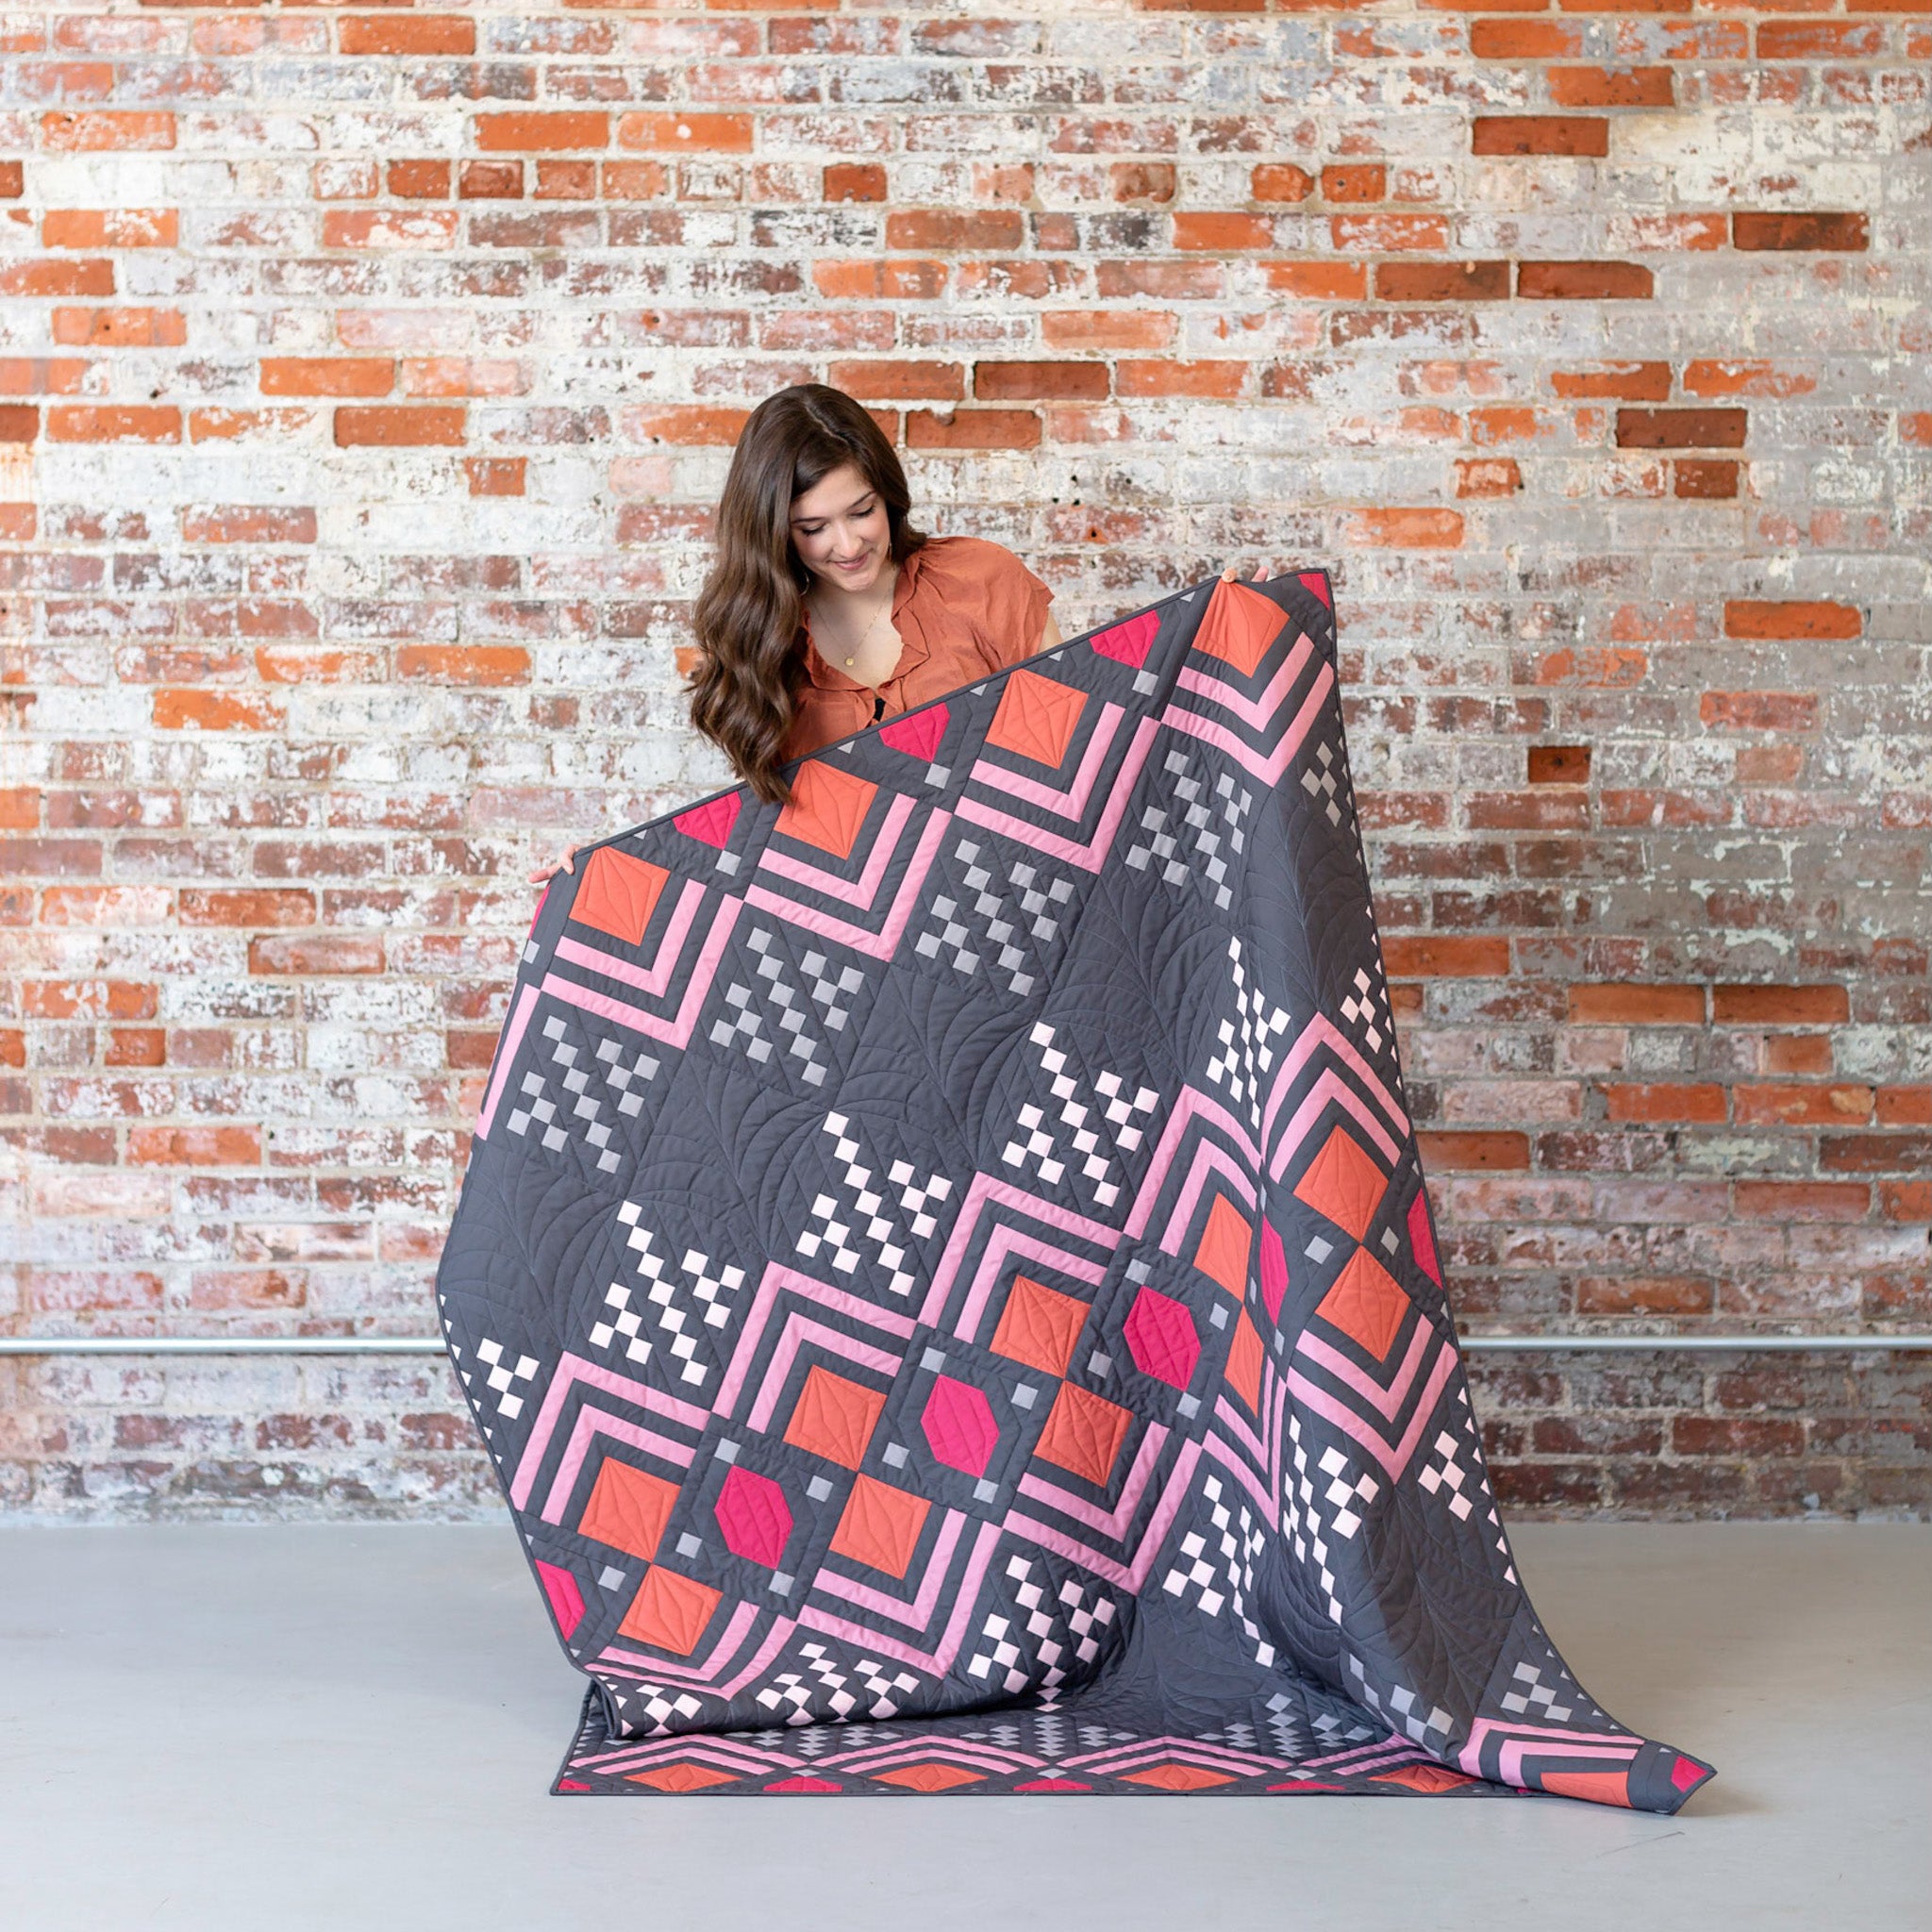 Deco - the Cover Quilt!